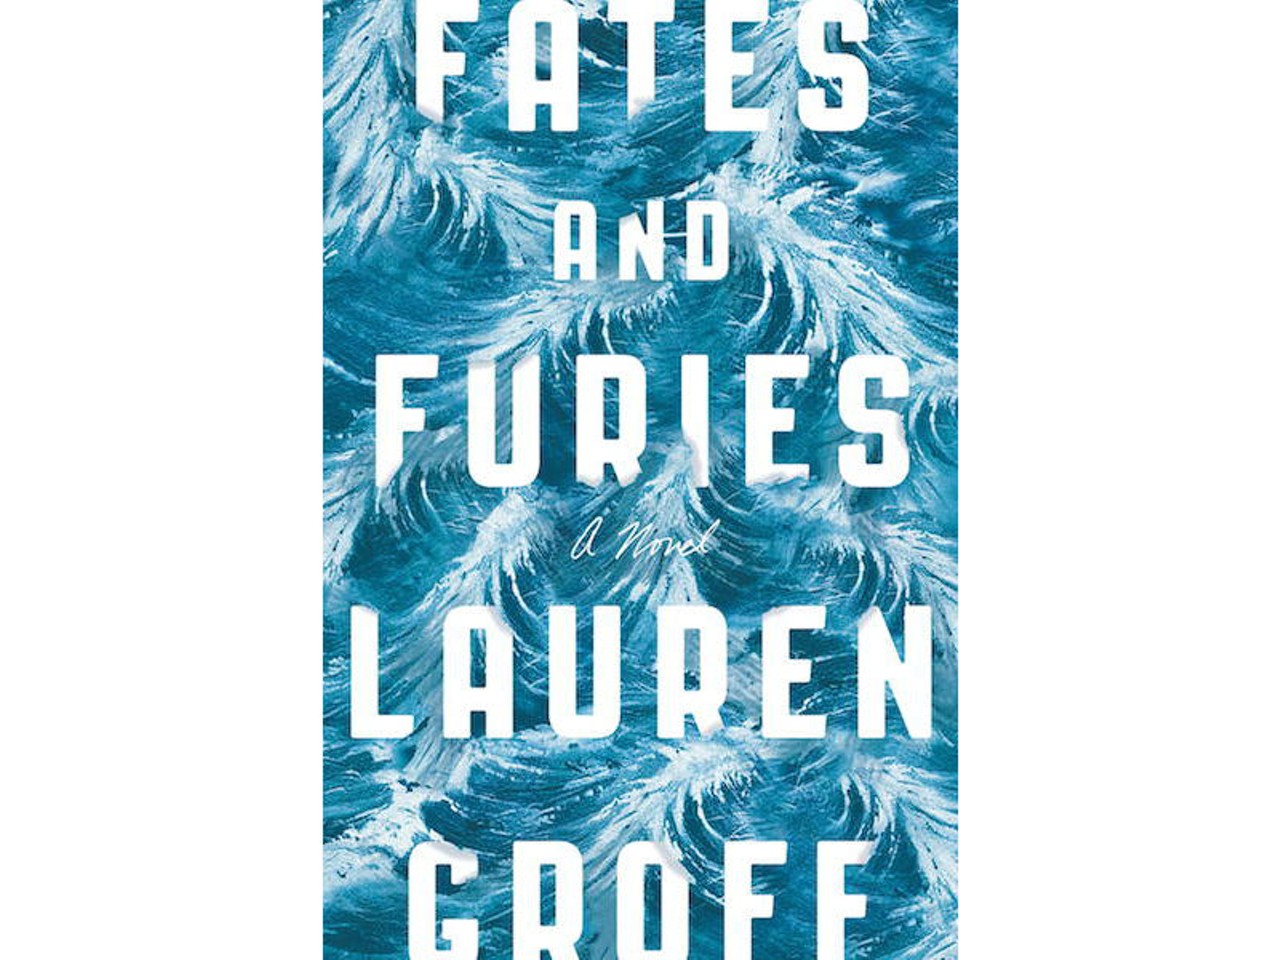 Fates and Furies, a novel by Lauren Groff (Riverhead Books, 391 pages)
Groff&#146;s prose is so incredibly lush that it almost doesn&#146;t matter what she writes about. This particular beauty follows the marriage of Lotto, a golden boy from Florida water-bottling wealth, and his muse Mathilde, whose mysterious past is not revealed until the second half of the book, when everything we thought we knew about the last 200 pages changes. &#151;RR